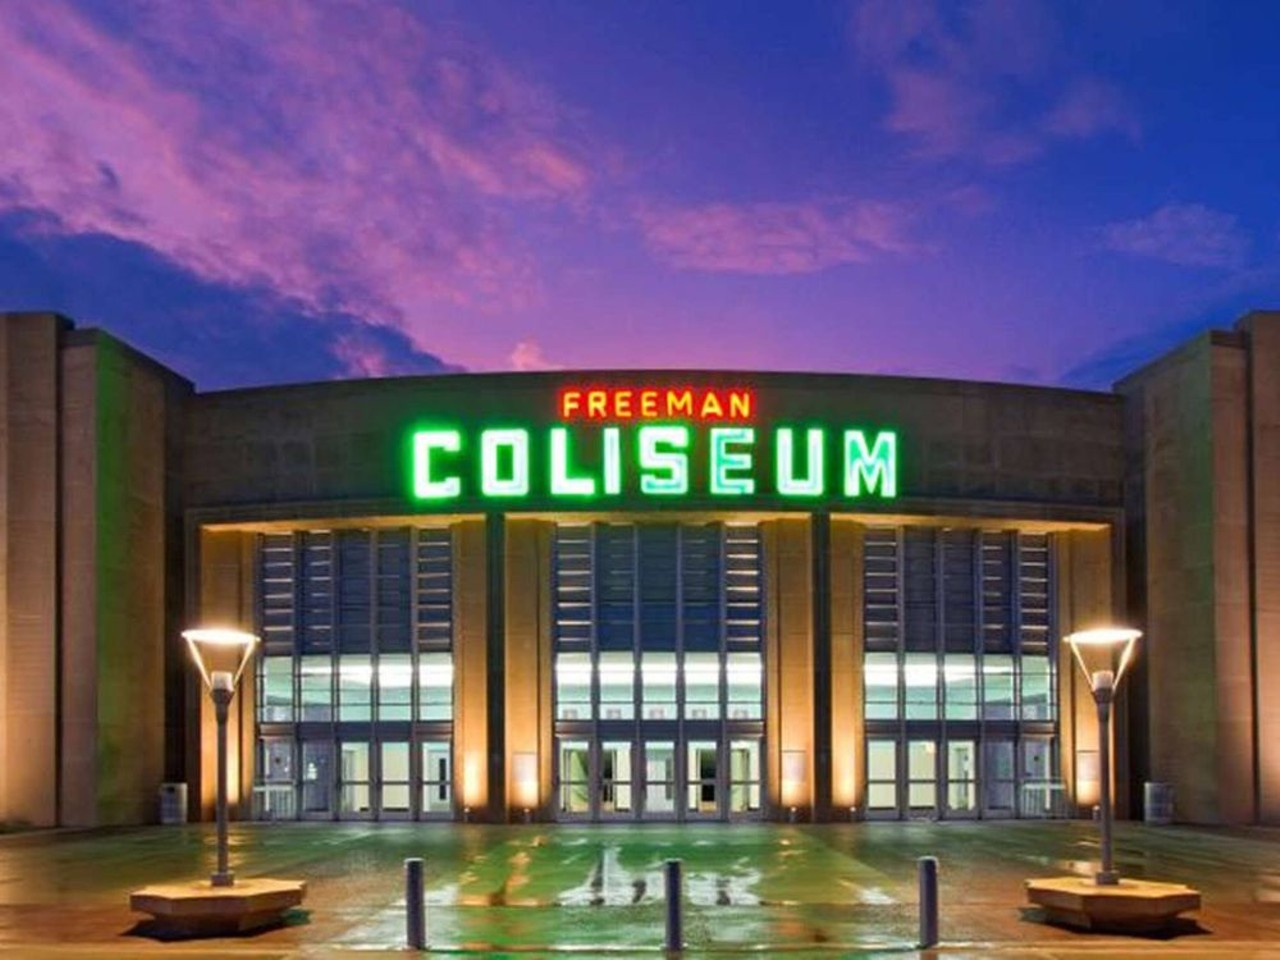 Freeman Coliseum
Paranormal experts say Teddy Roosevelt trained the Rough Riders out where the Freeman stands today, though  other sources say that they actually trained by the San Antonio River in the area that’s now home to Roosevelt Park. Either way, ghost hunters claim this area was a training ground, and that one 6'4" spirit — we’re not sure how they got his exact measurements — suspected to be a Rough Rider, still hangs out here today. Aside from the Rough Riders, there’s talk of a circus clown that died of a heart attack and a woman who was trampled by a bull who are seen at the Freeman.